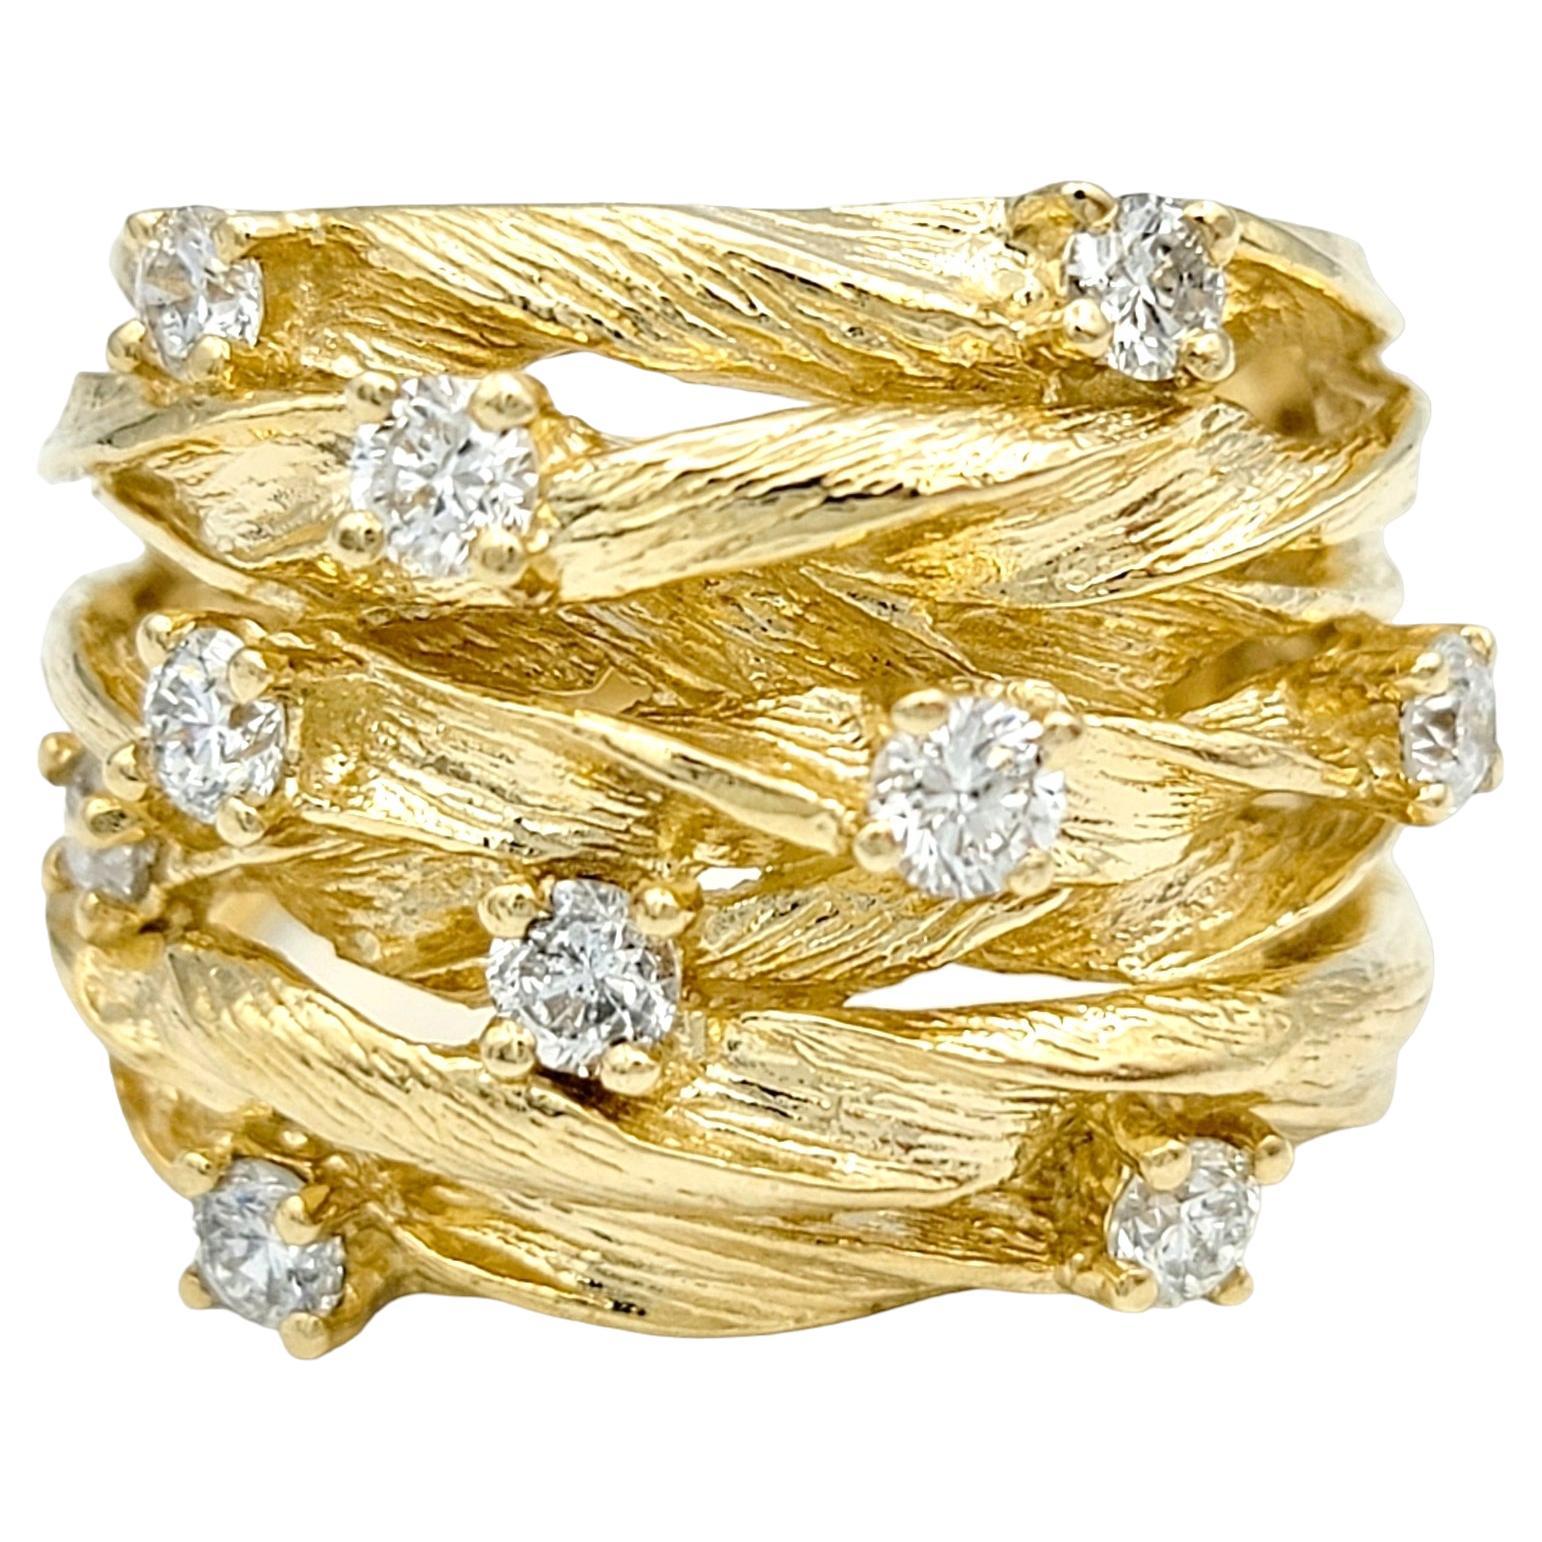 Effy D'Oro Round Diamond and Rope Design Wide Band Ring in 14 Karat Yellow Gold